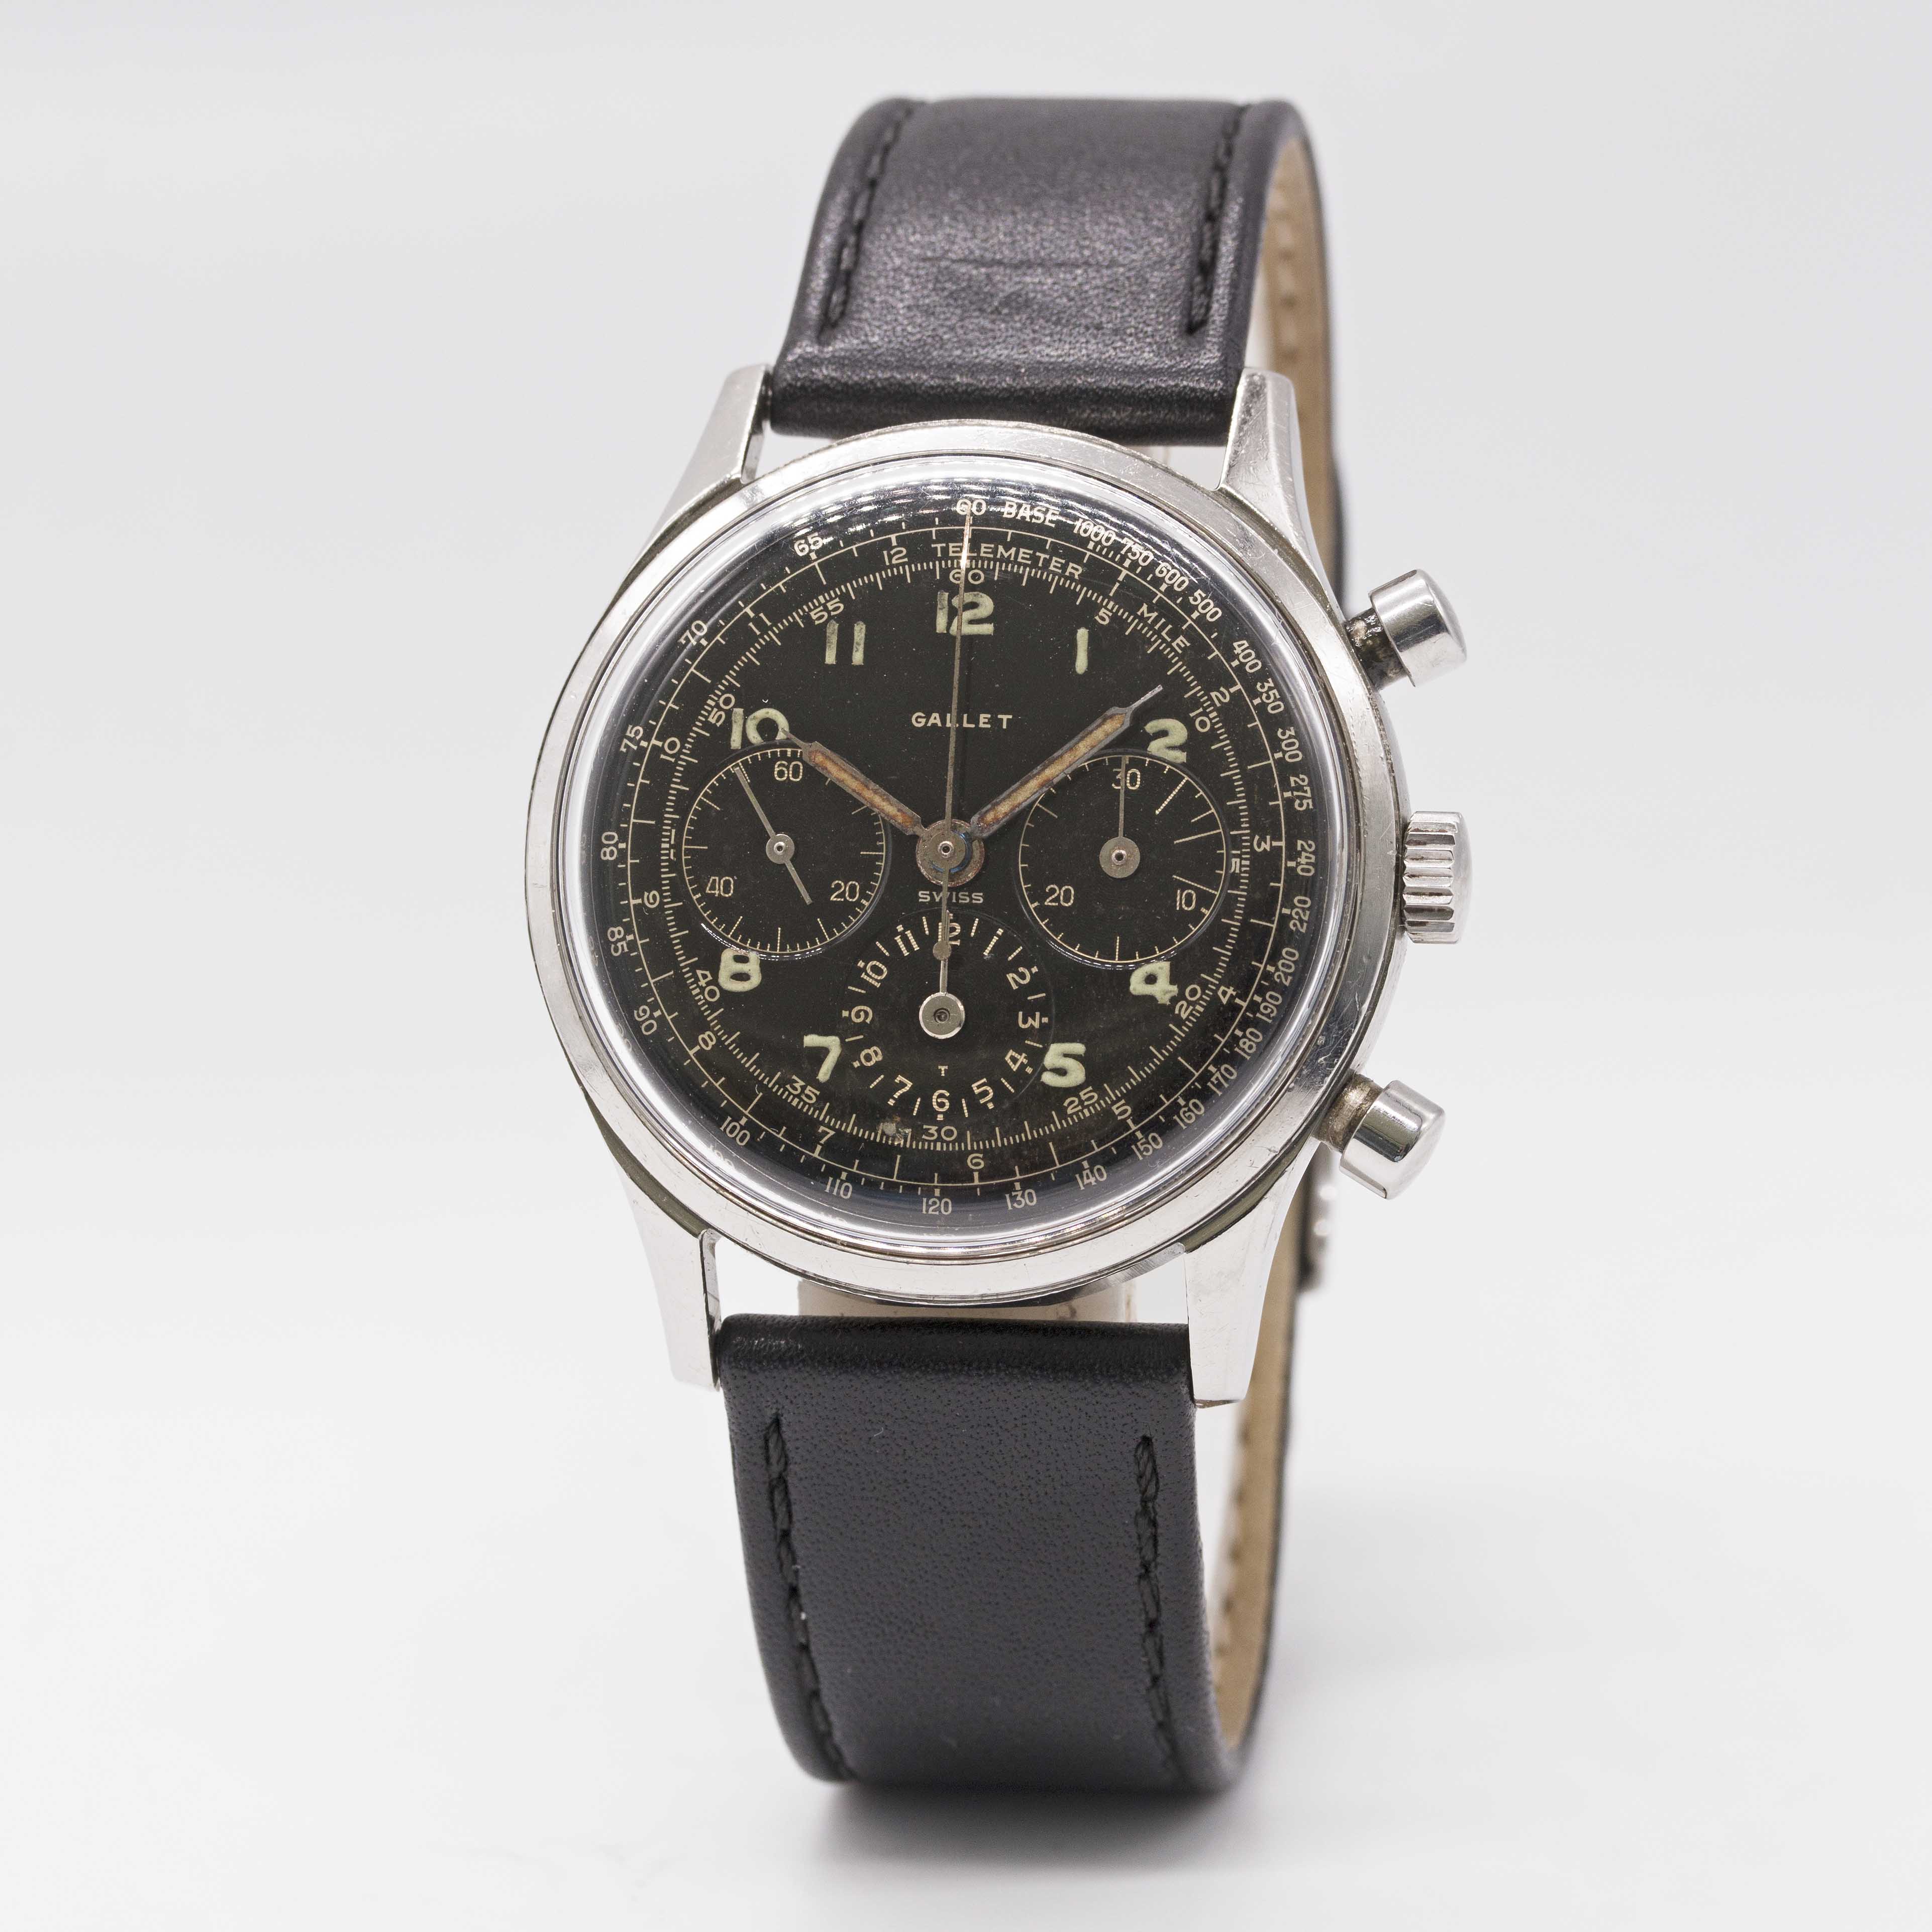 A GENTLEMAN'S LARGE SIZE STAINLESS STEEL GALLET MULTICHRON 12 "JIM CLARK" CHRONOGRAPH WRIST WATCH - Image 5 of 10